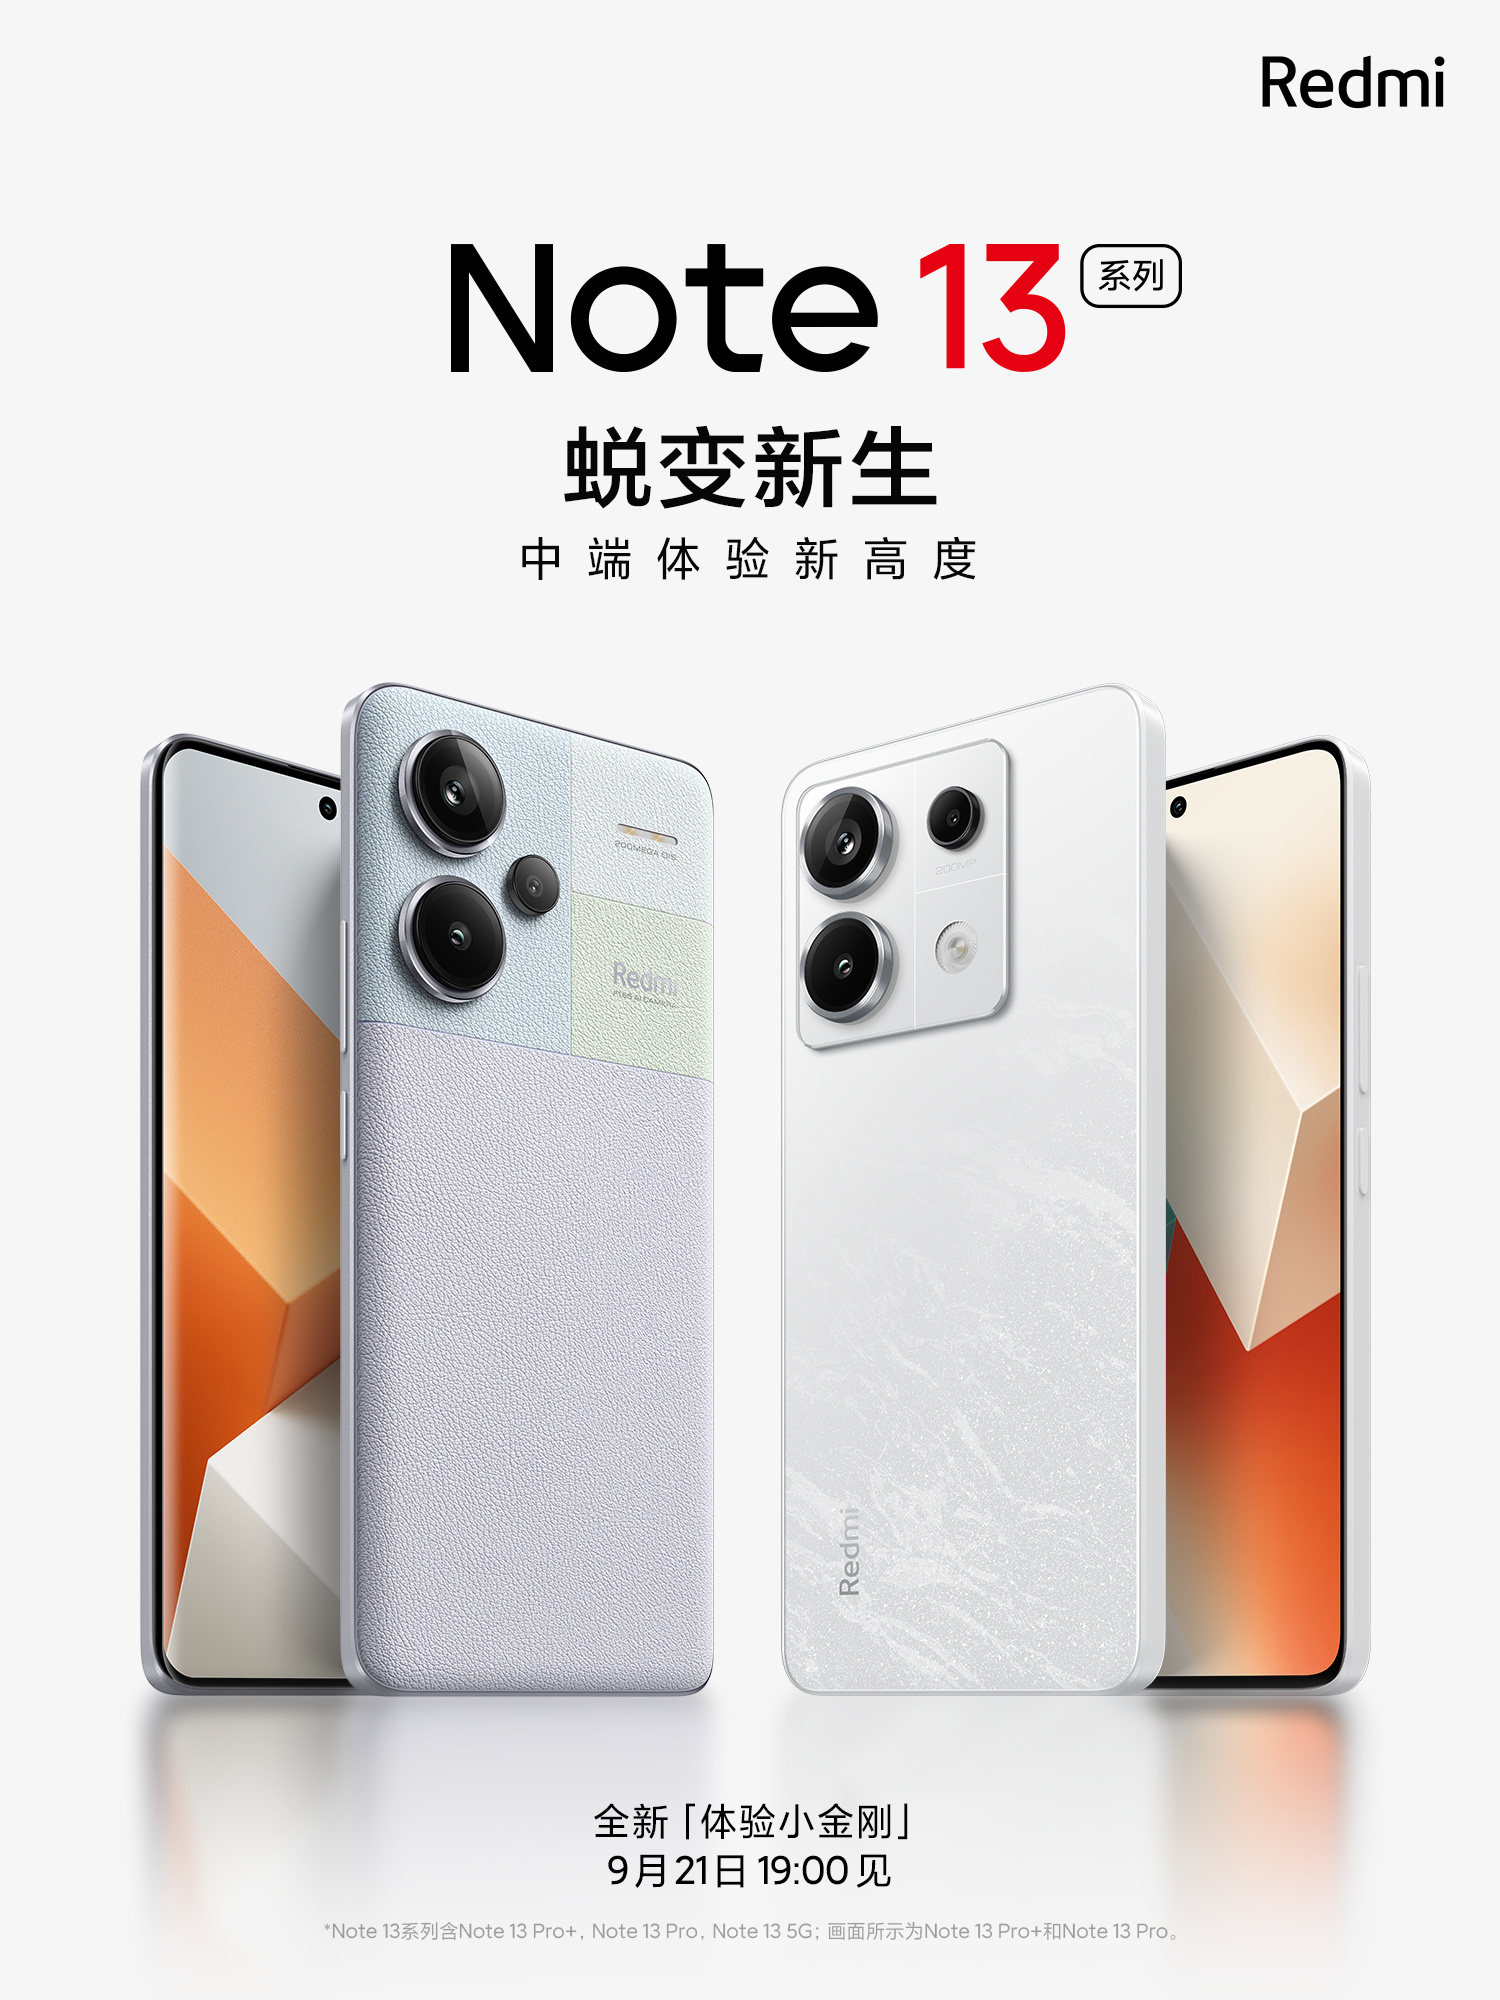 Redmi Note 13 Pro Plus 5G - Specifications, Price, and Features 2023 -  Tweak Info Tech